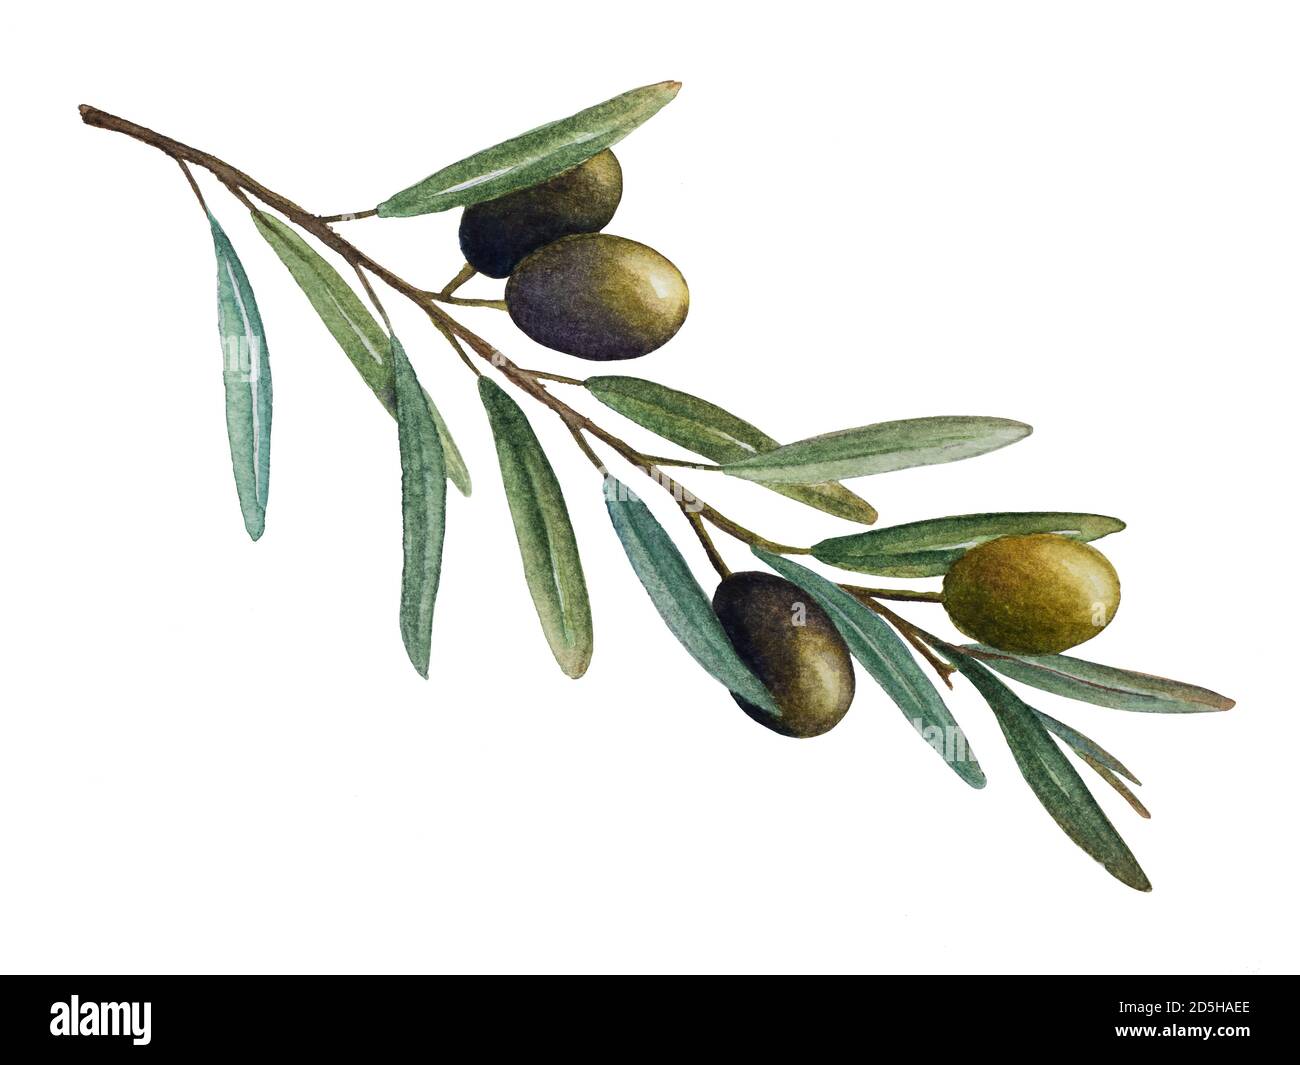 https://c8.alamy.com/comp/2D5HAEE/olive-branch-with-green-olives-watercolor-illustration-2D5HAEE.jpg